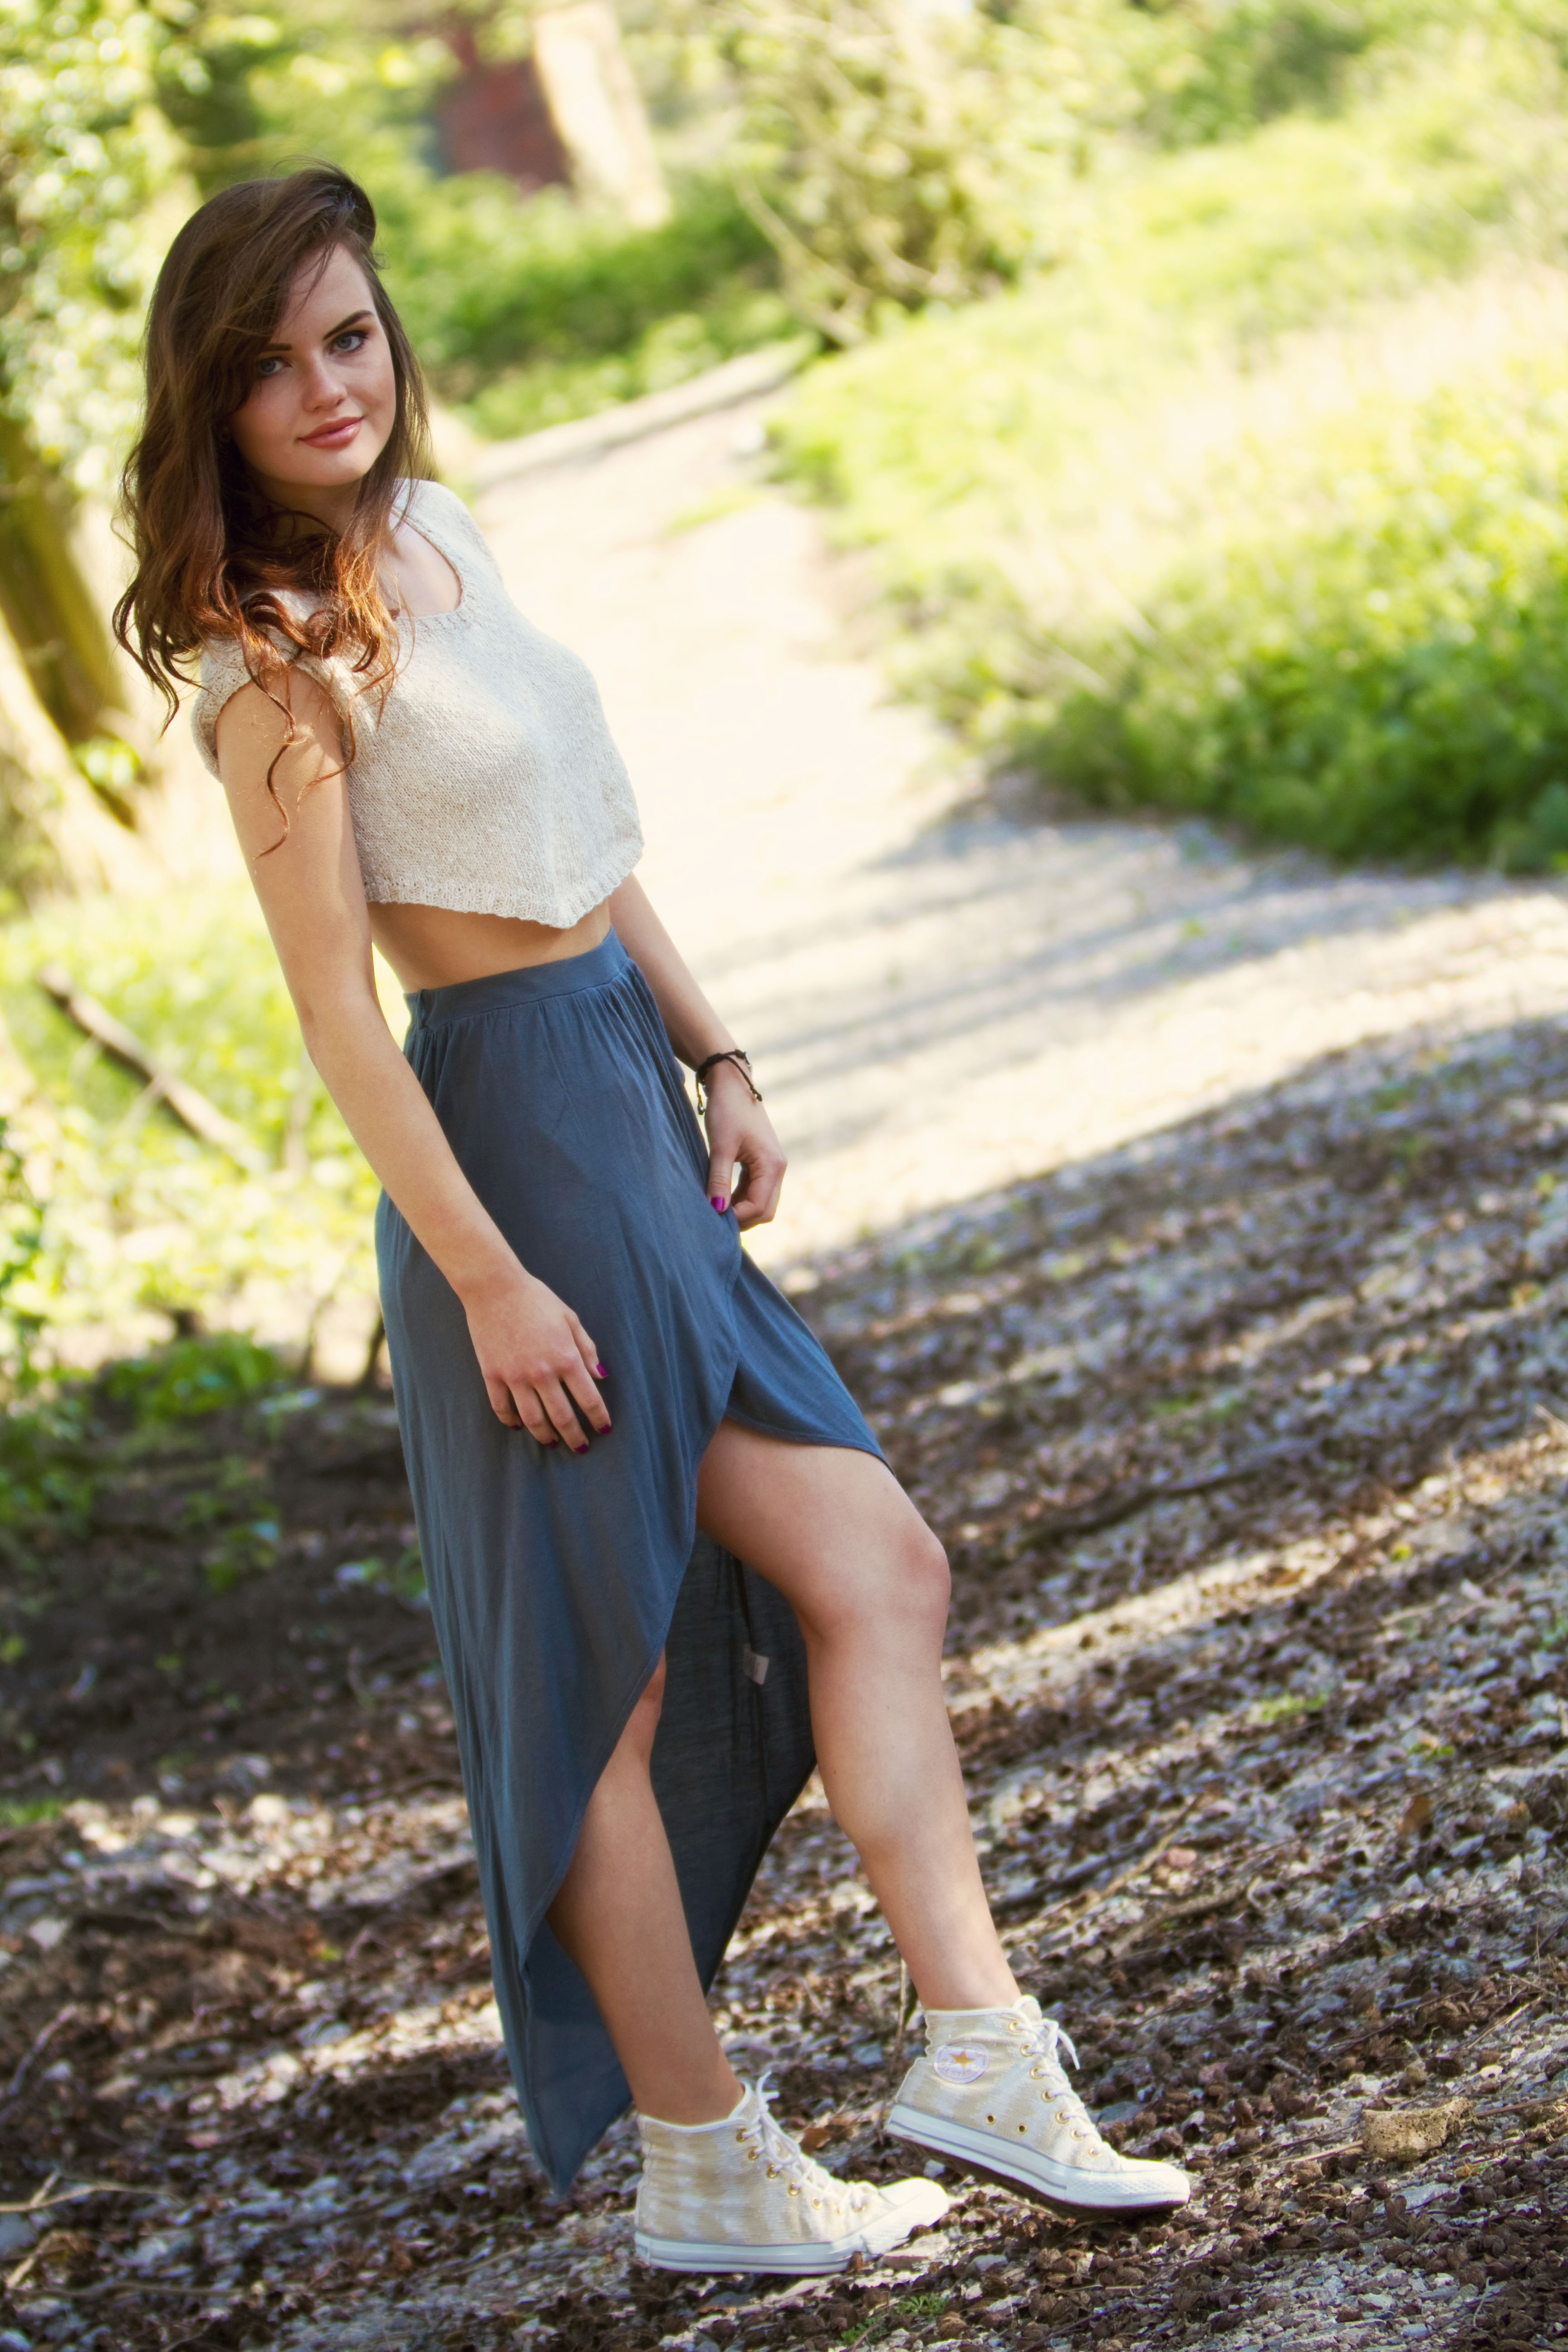 Teen girl wearing grey and cream outfit on woodland path